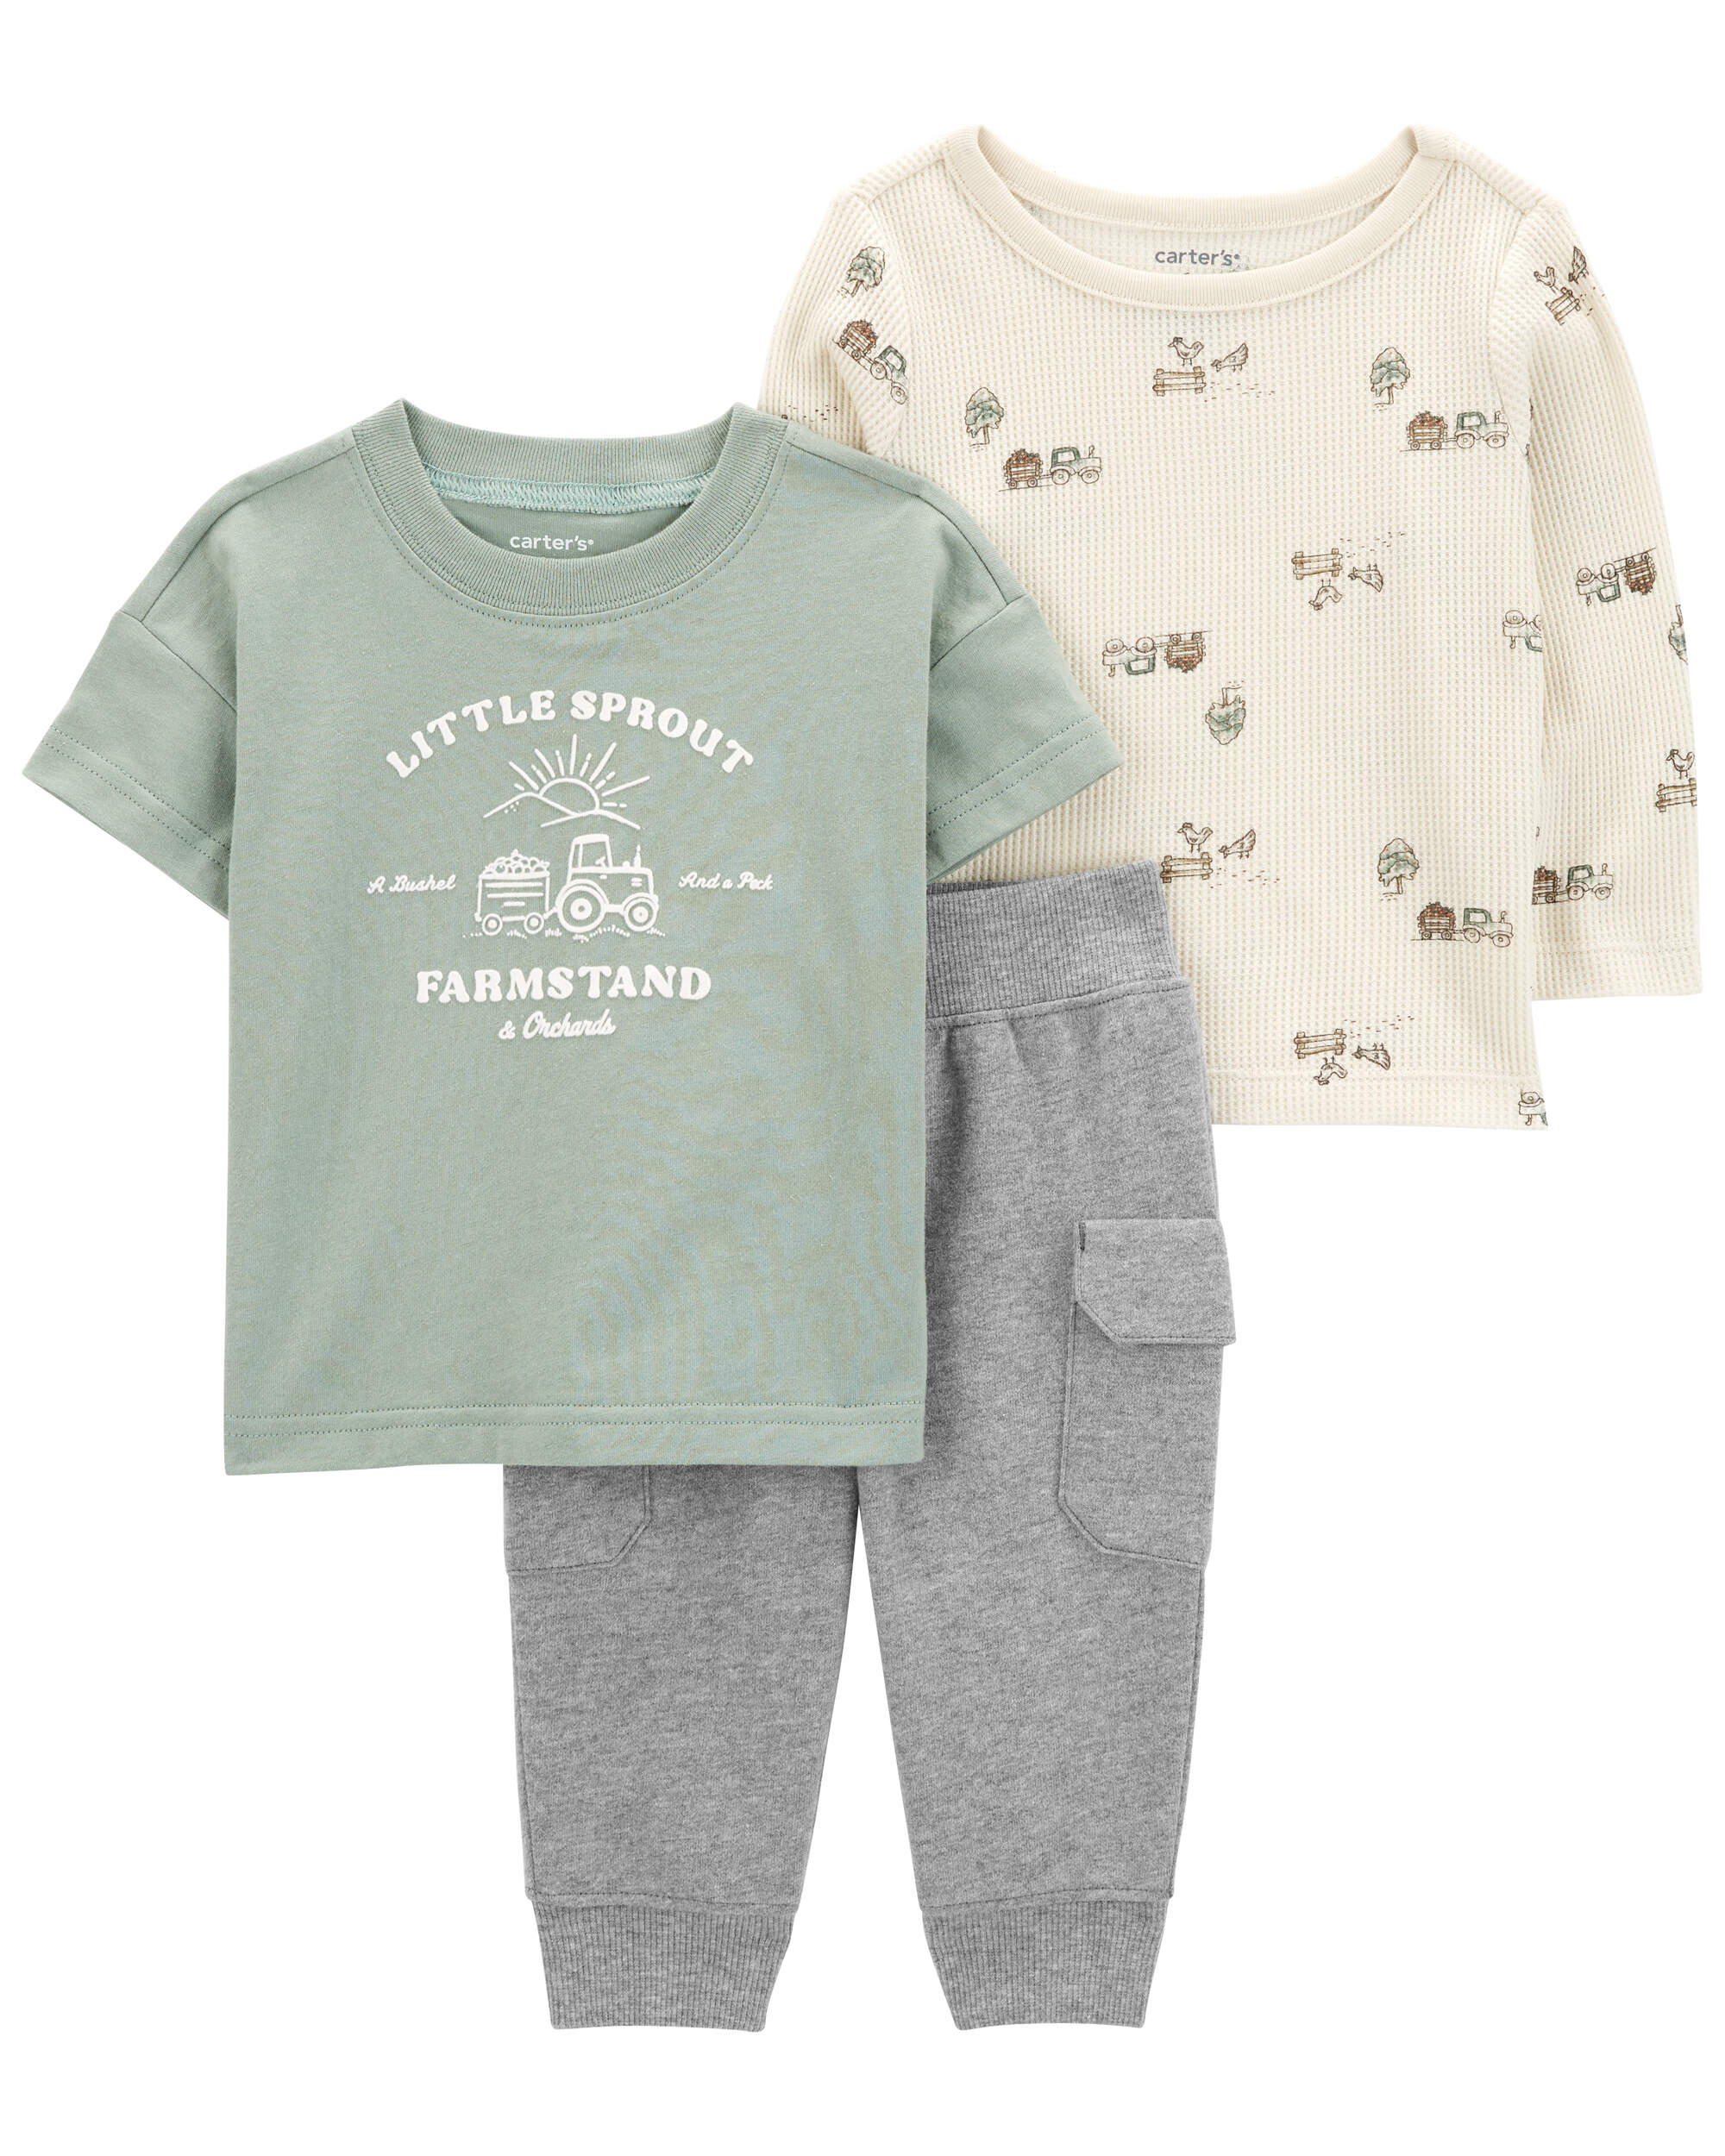 Baby 3-Piece Little Sprout Outfit Set